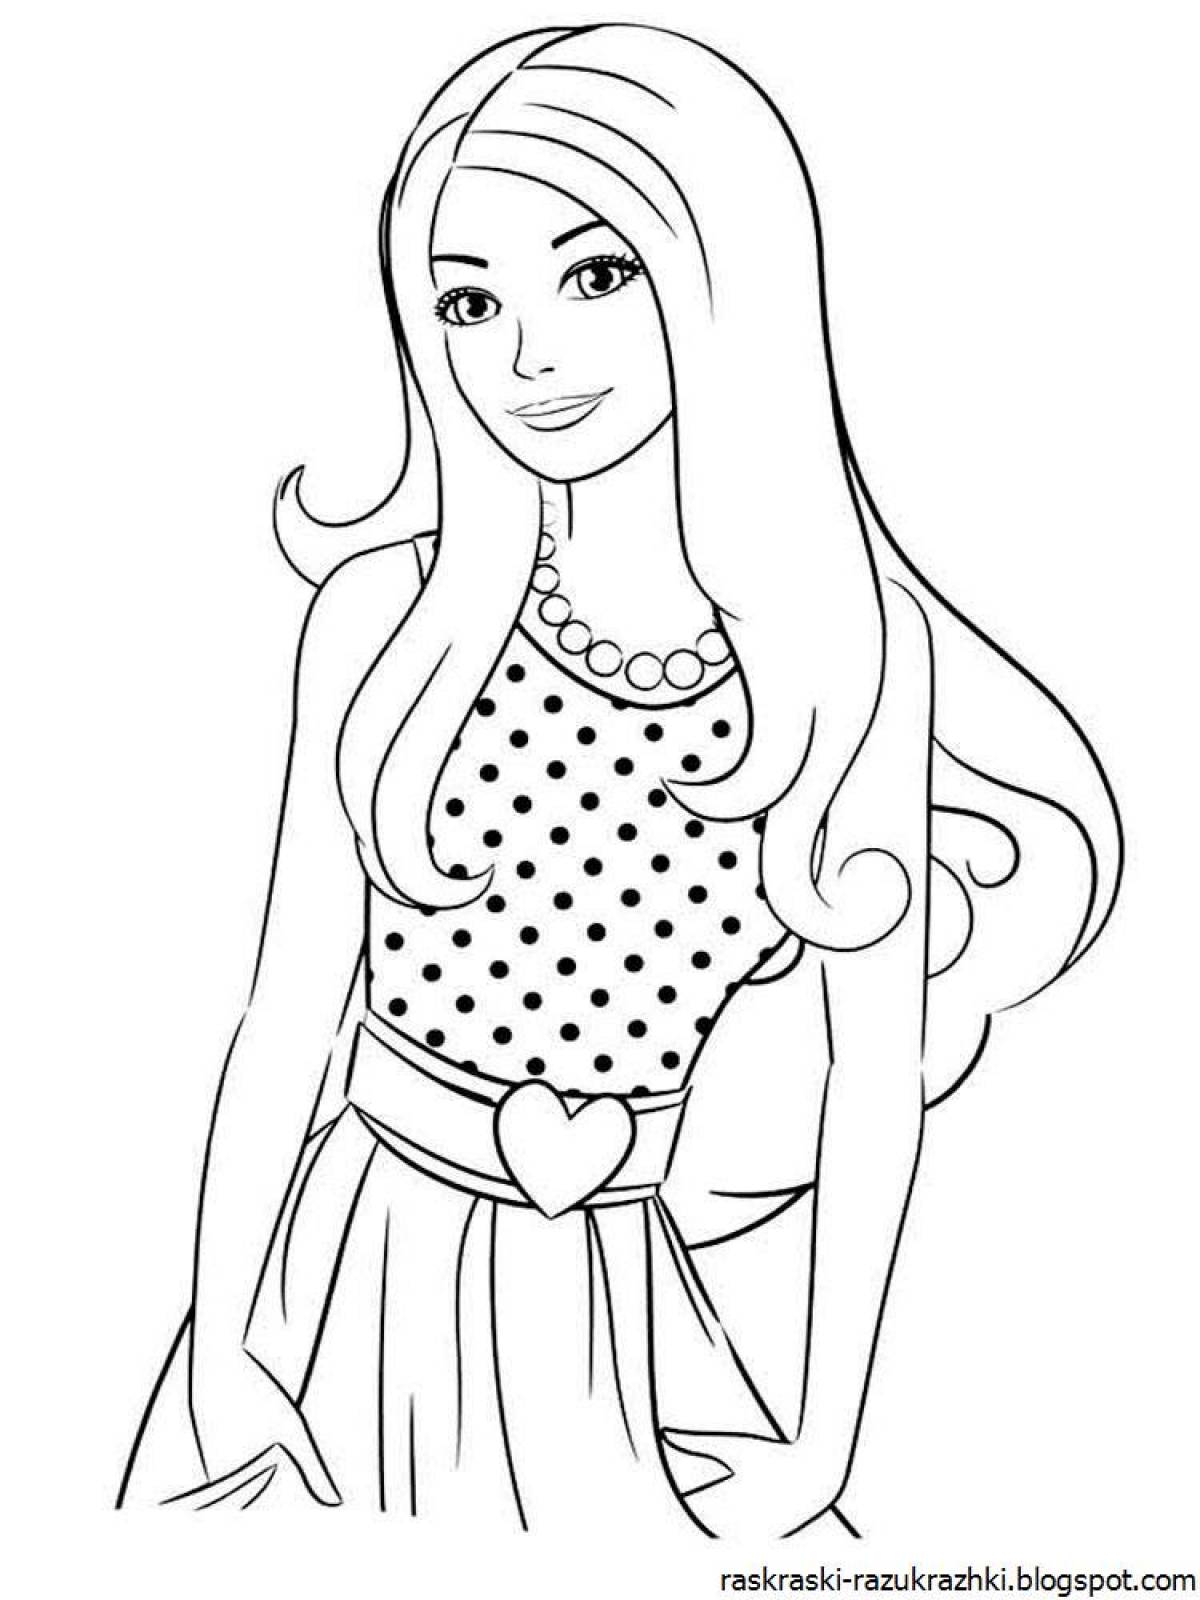 Refreshing barbie doll coloring page